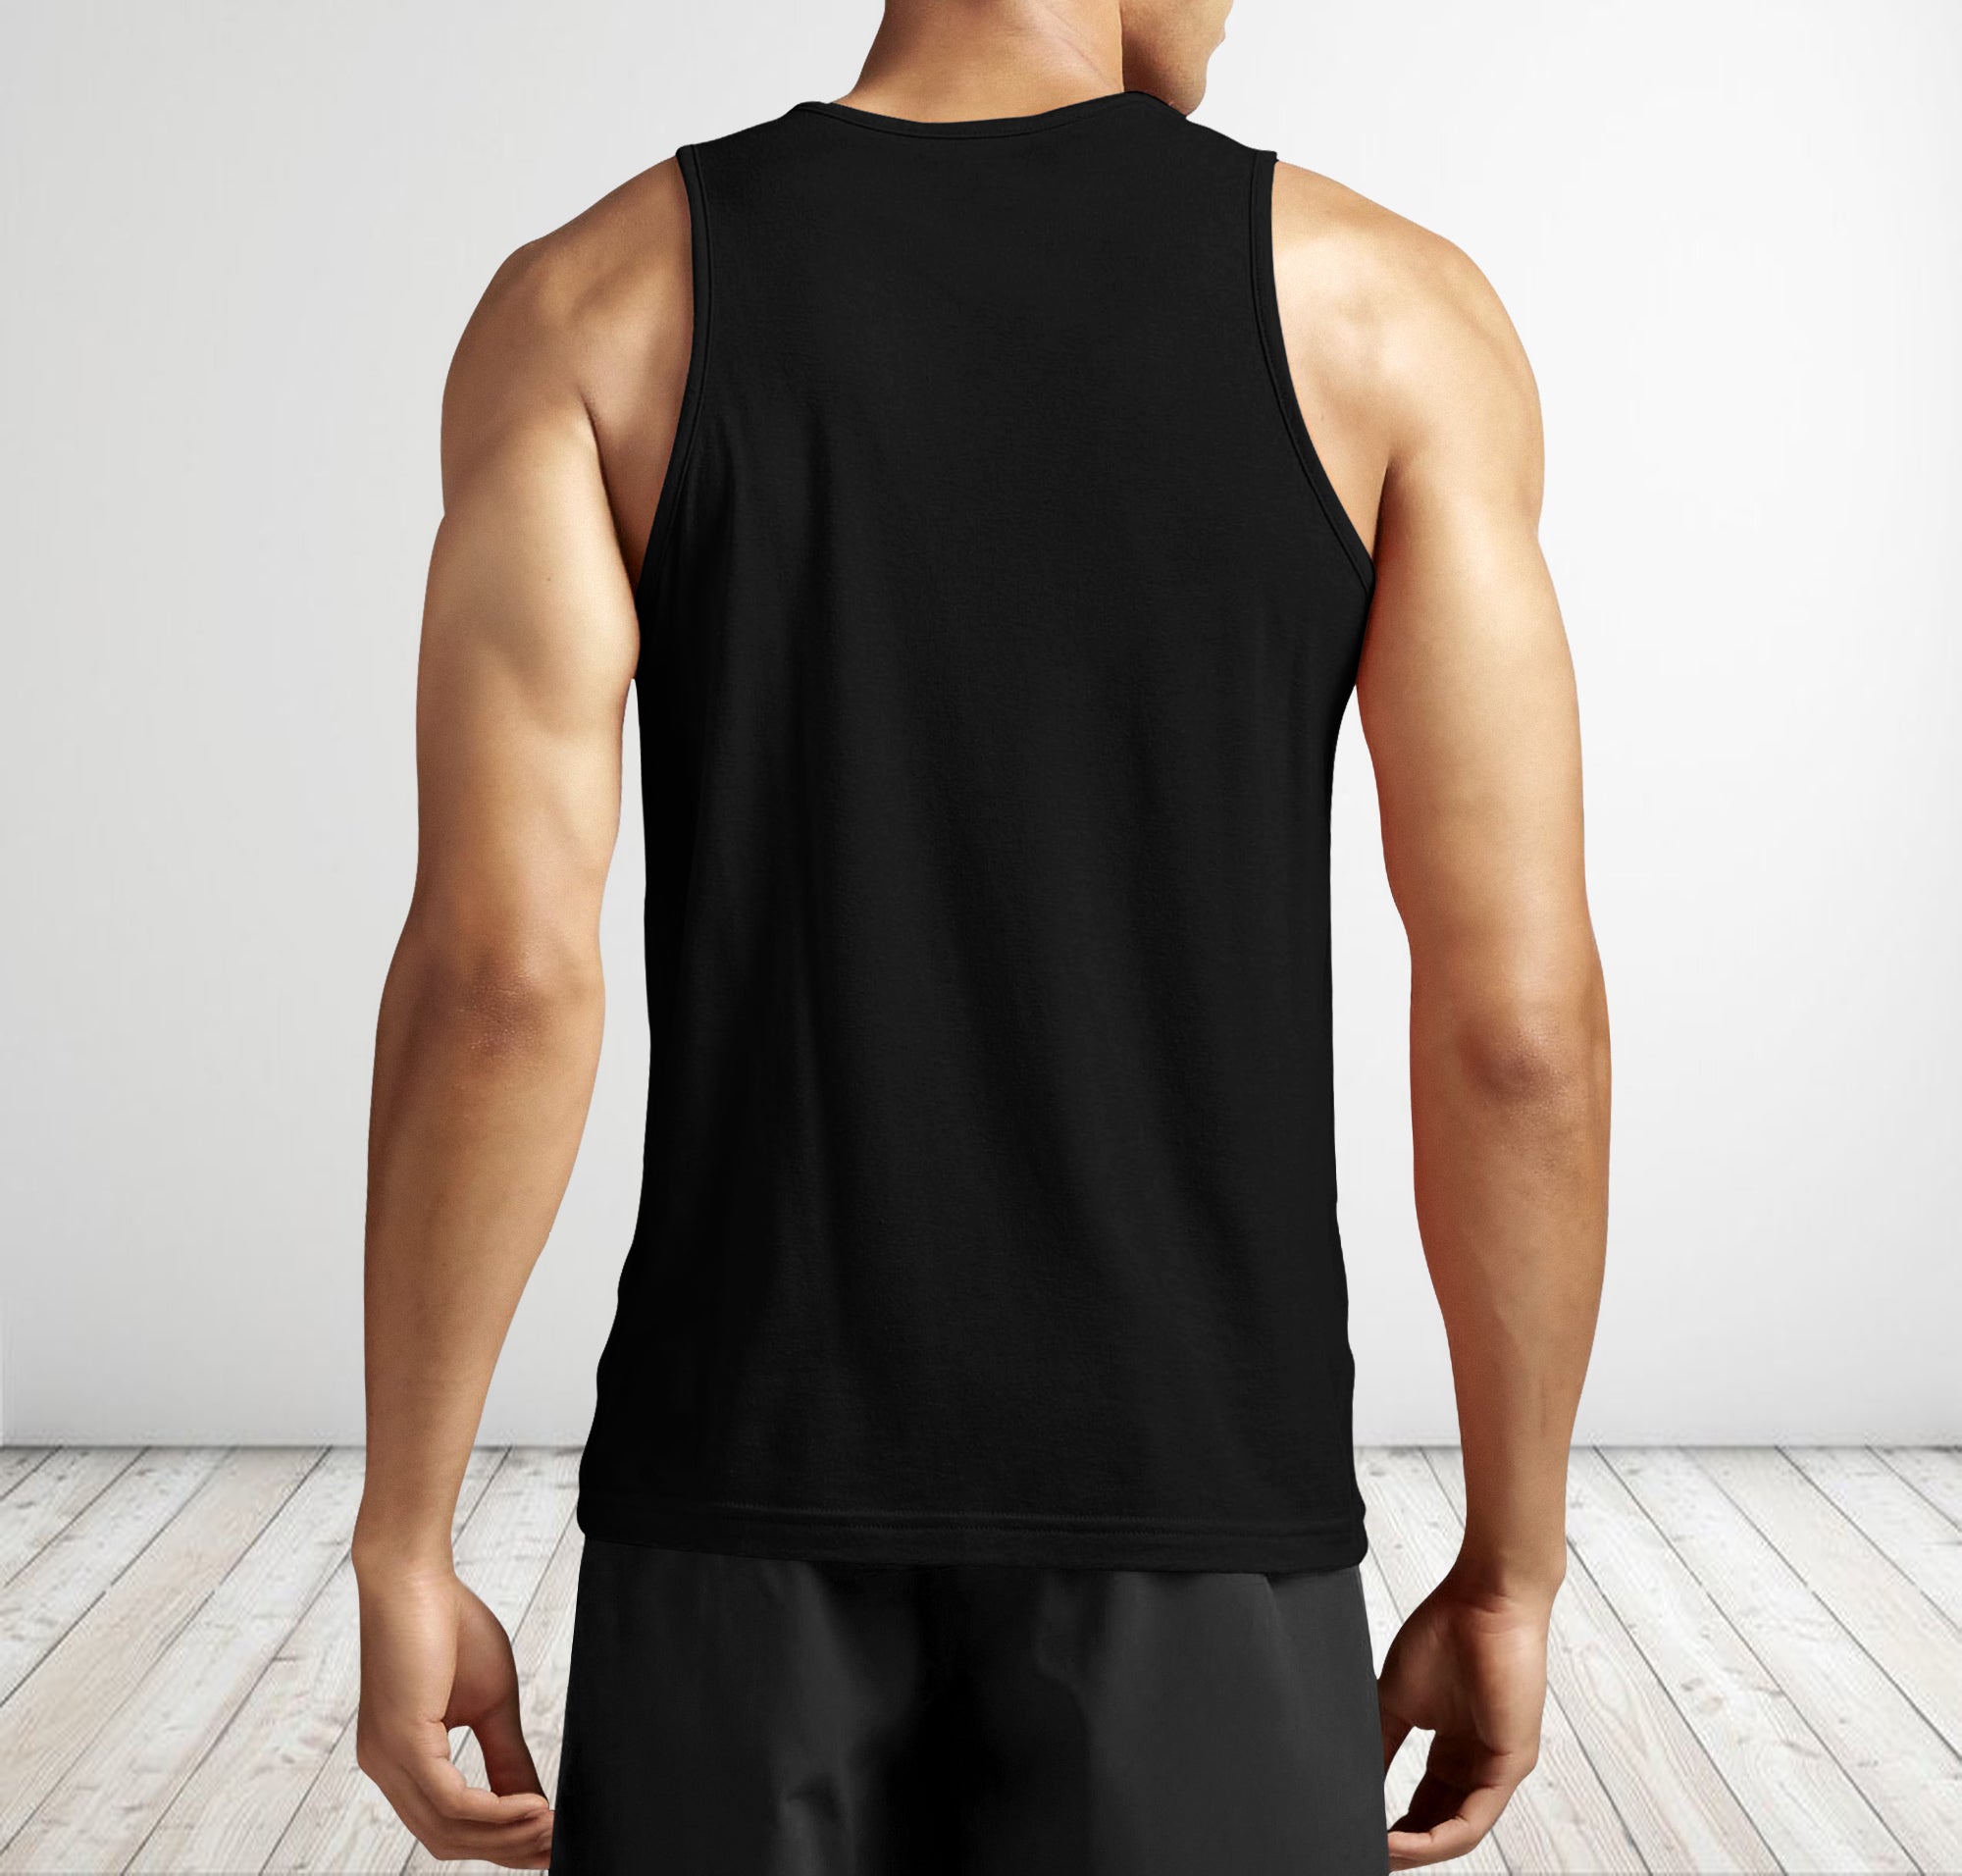 Workout Tank Top - Men's Gym-Ready "Make Muscles Not Excuses" Shirt 10992